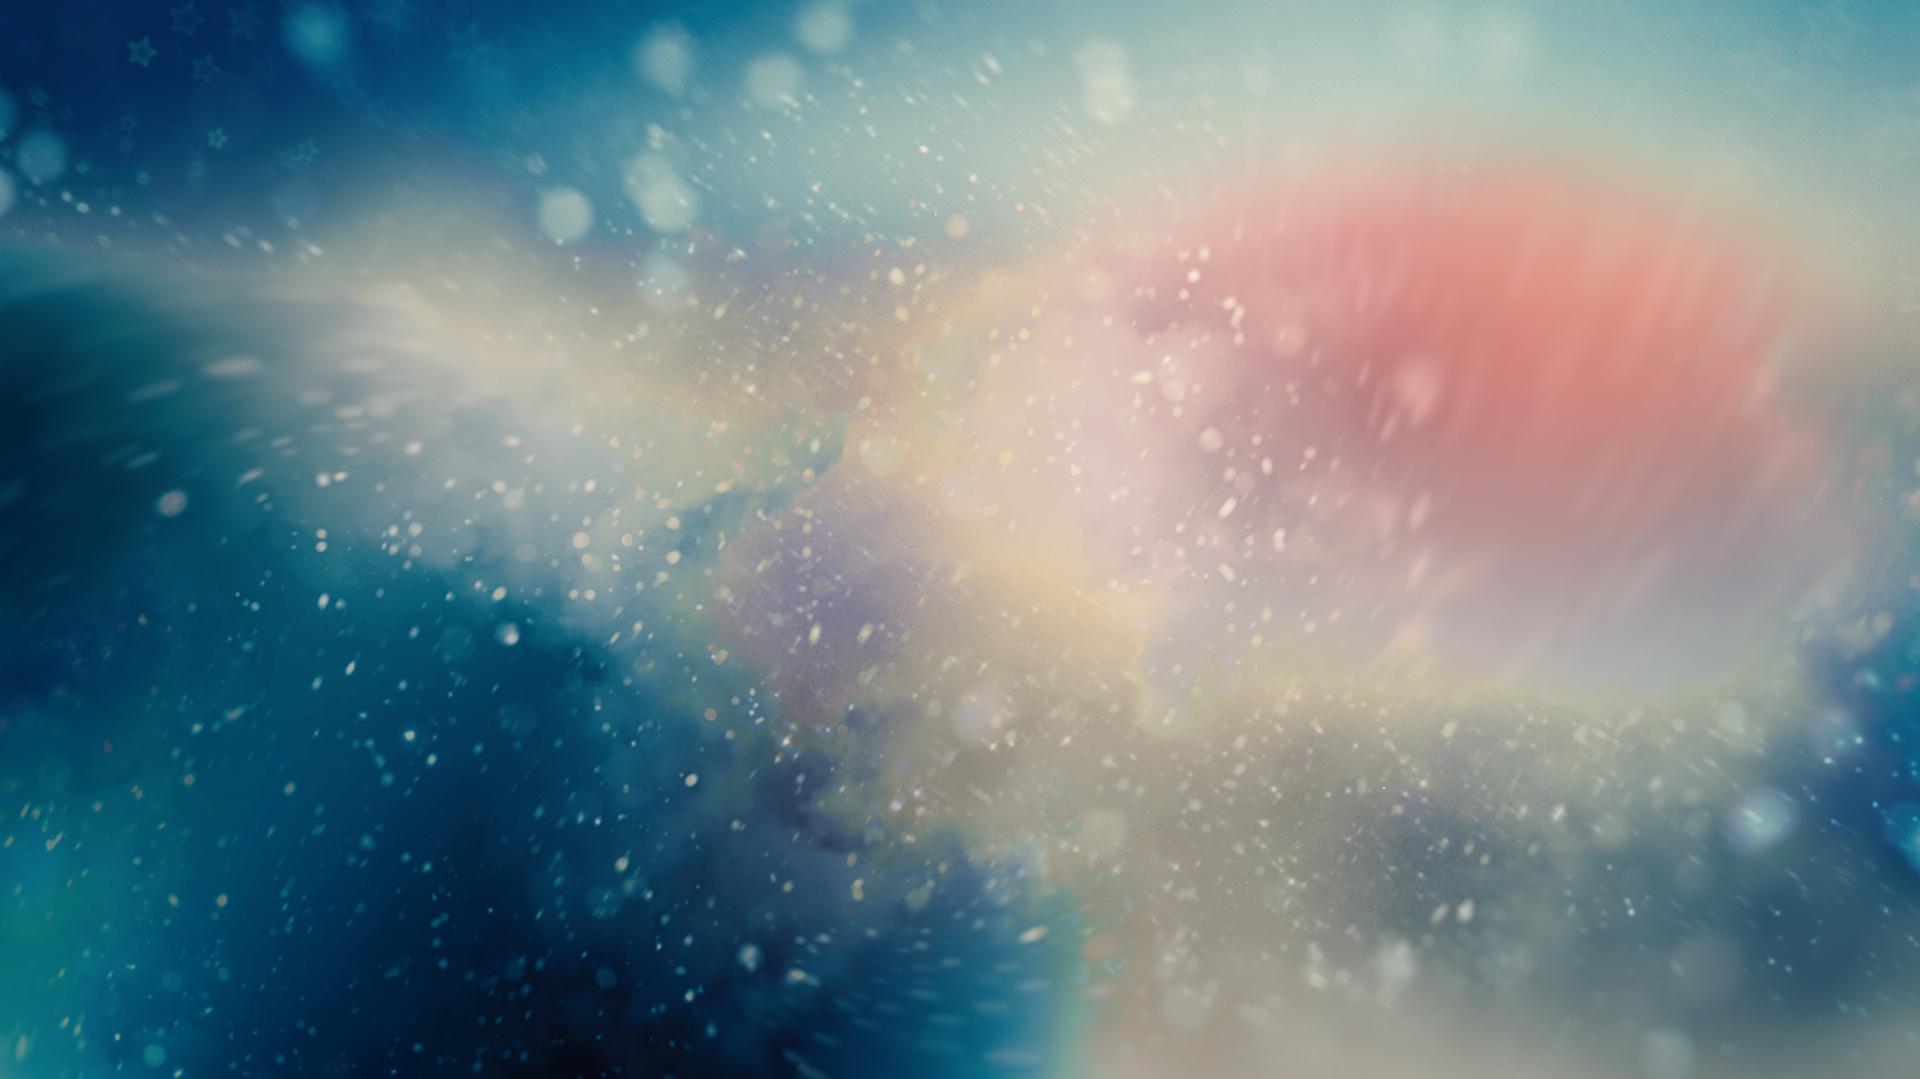 Abstract Winter Storm Wallpaper For Chromebook